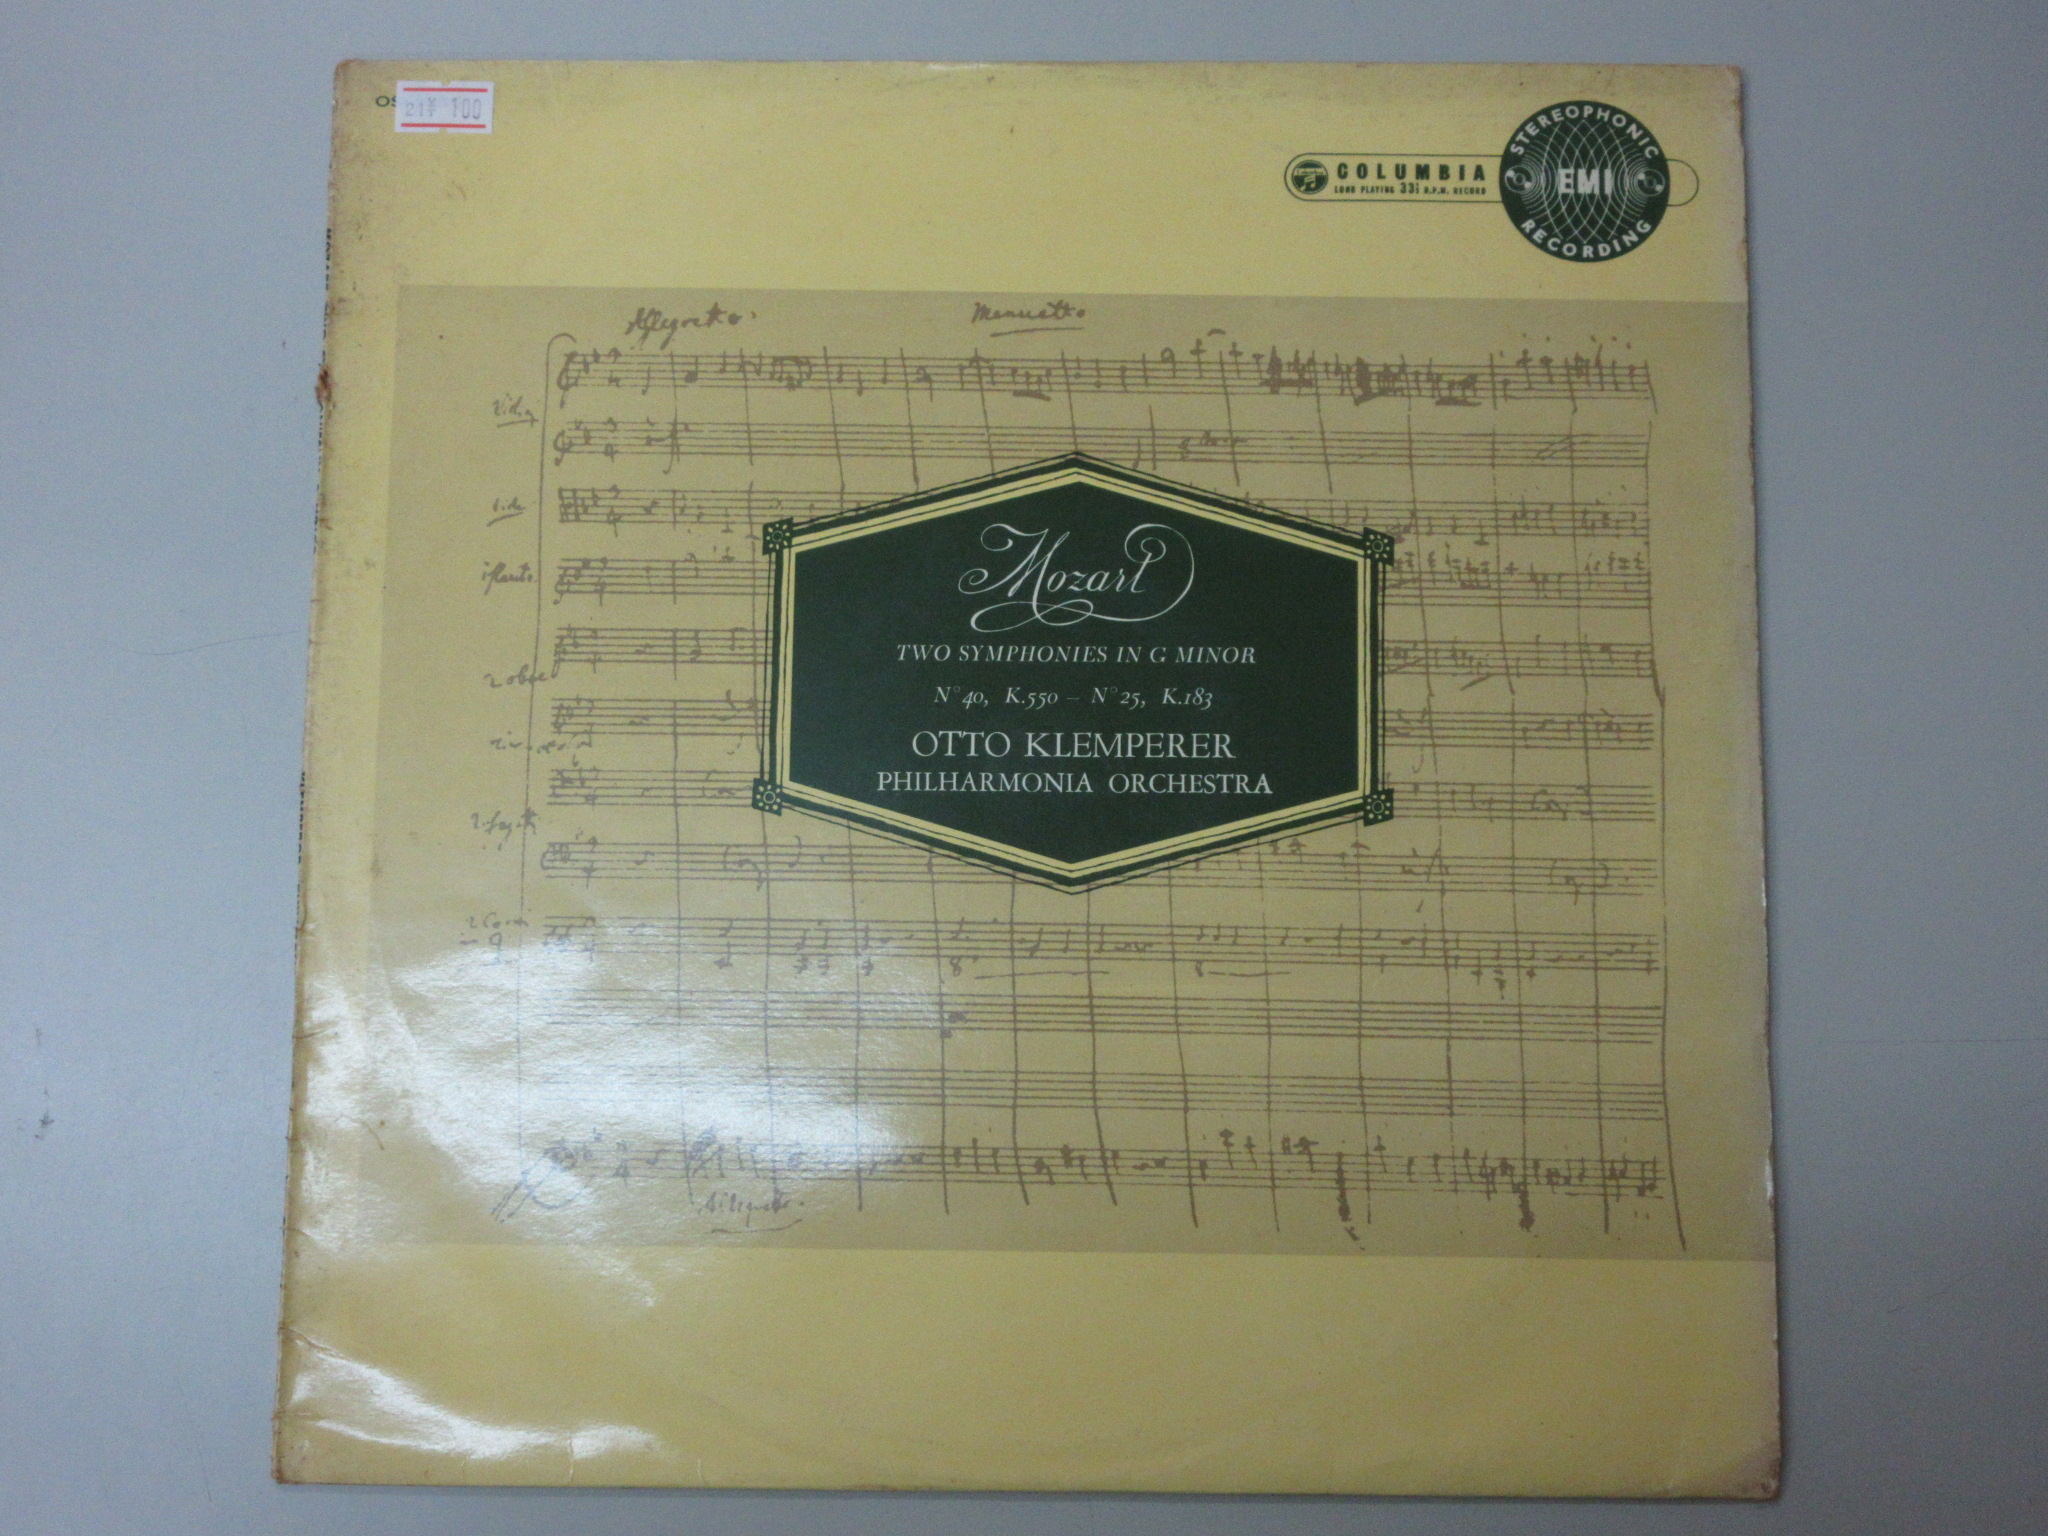 Mozart - Otto Klemperer, Philharmonia Orchestra - Two Symphonies In G Minor[OS-3086]